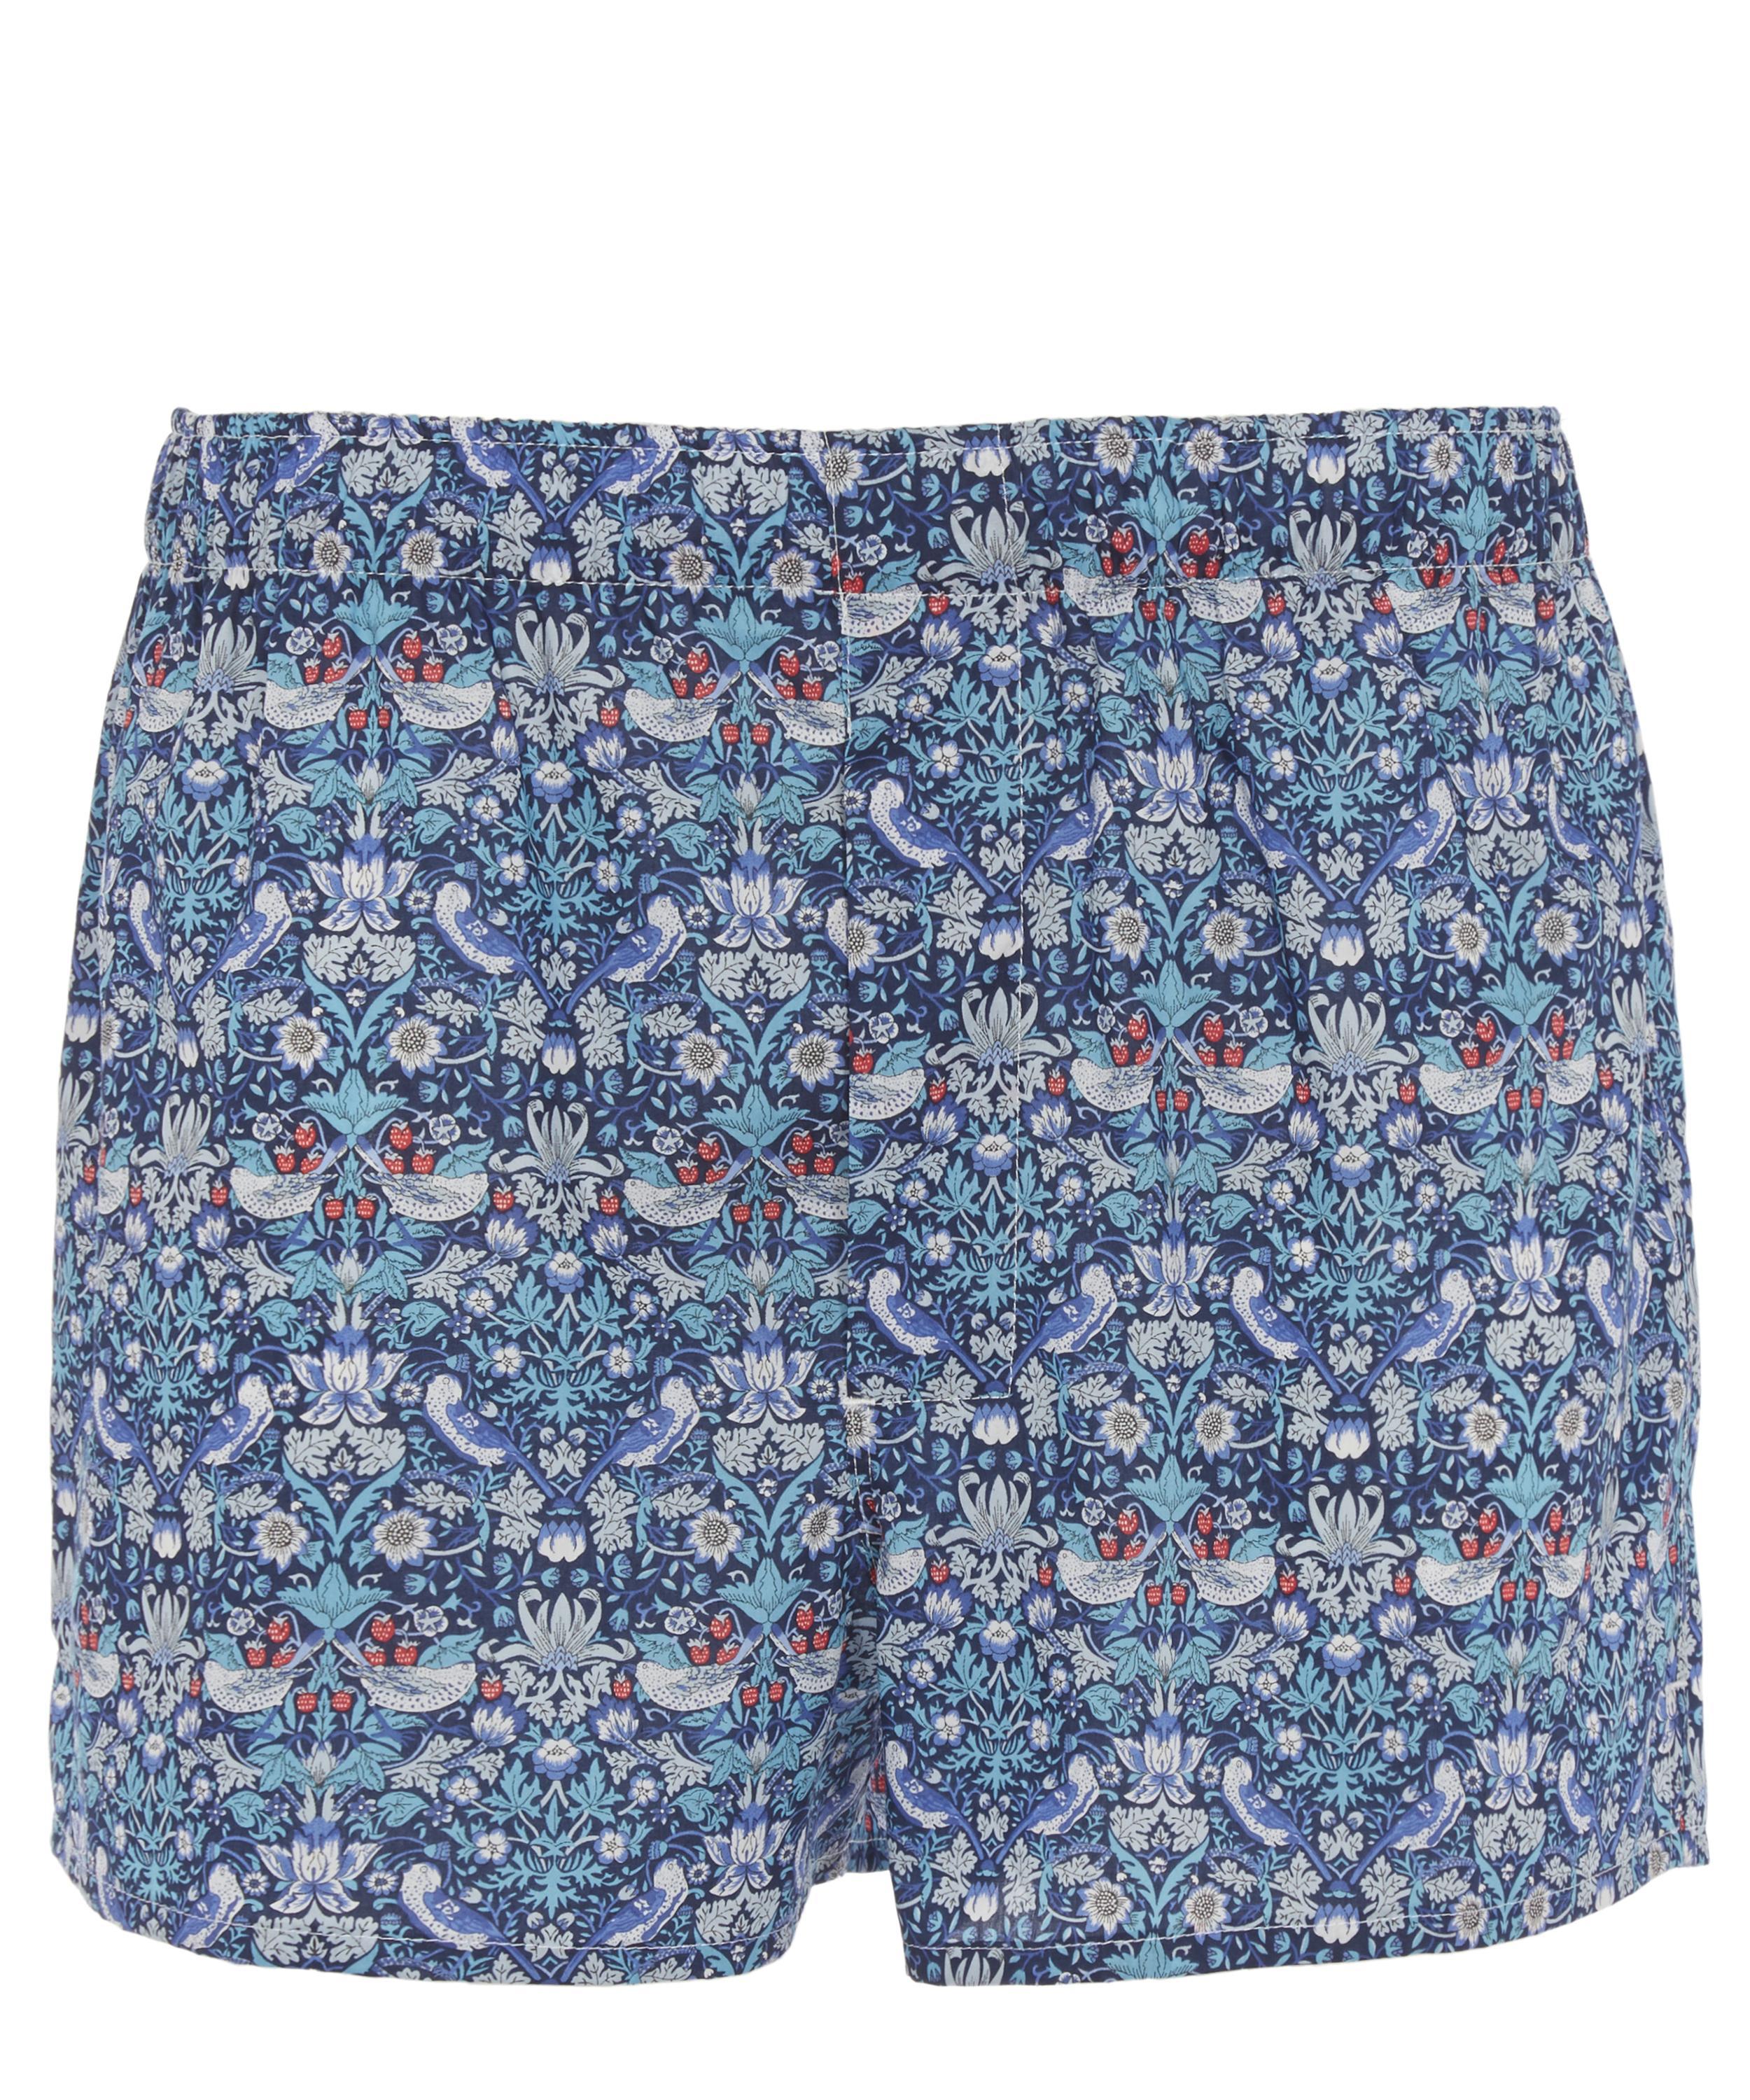 Lyst - Liberty Strawberry Thief Tana Lawn Cotton Boxer Shorts in Blue ...